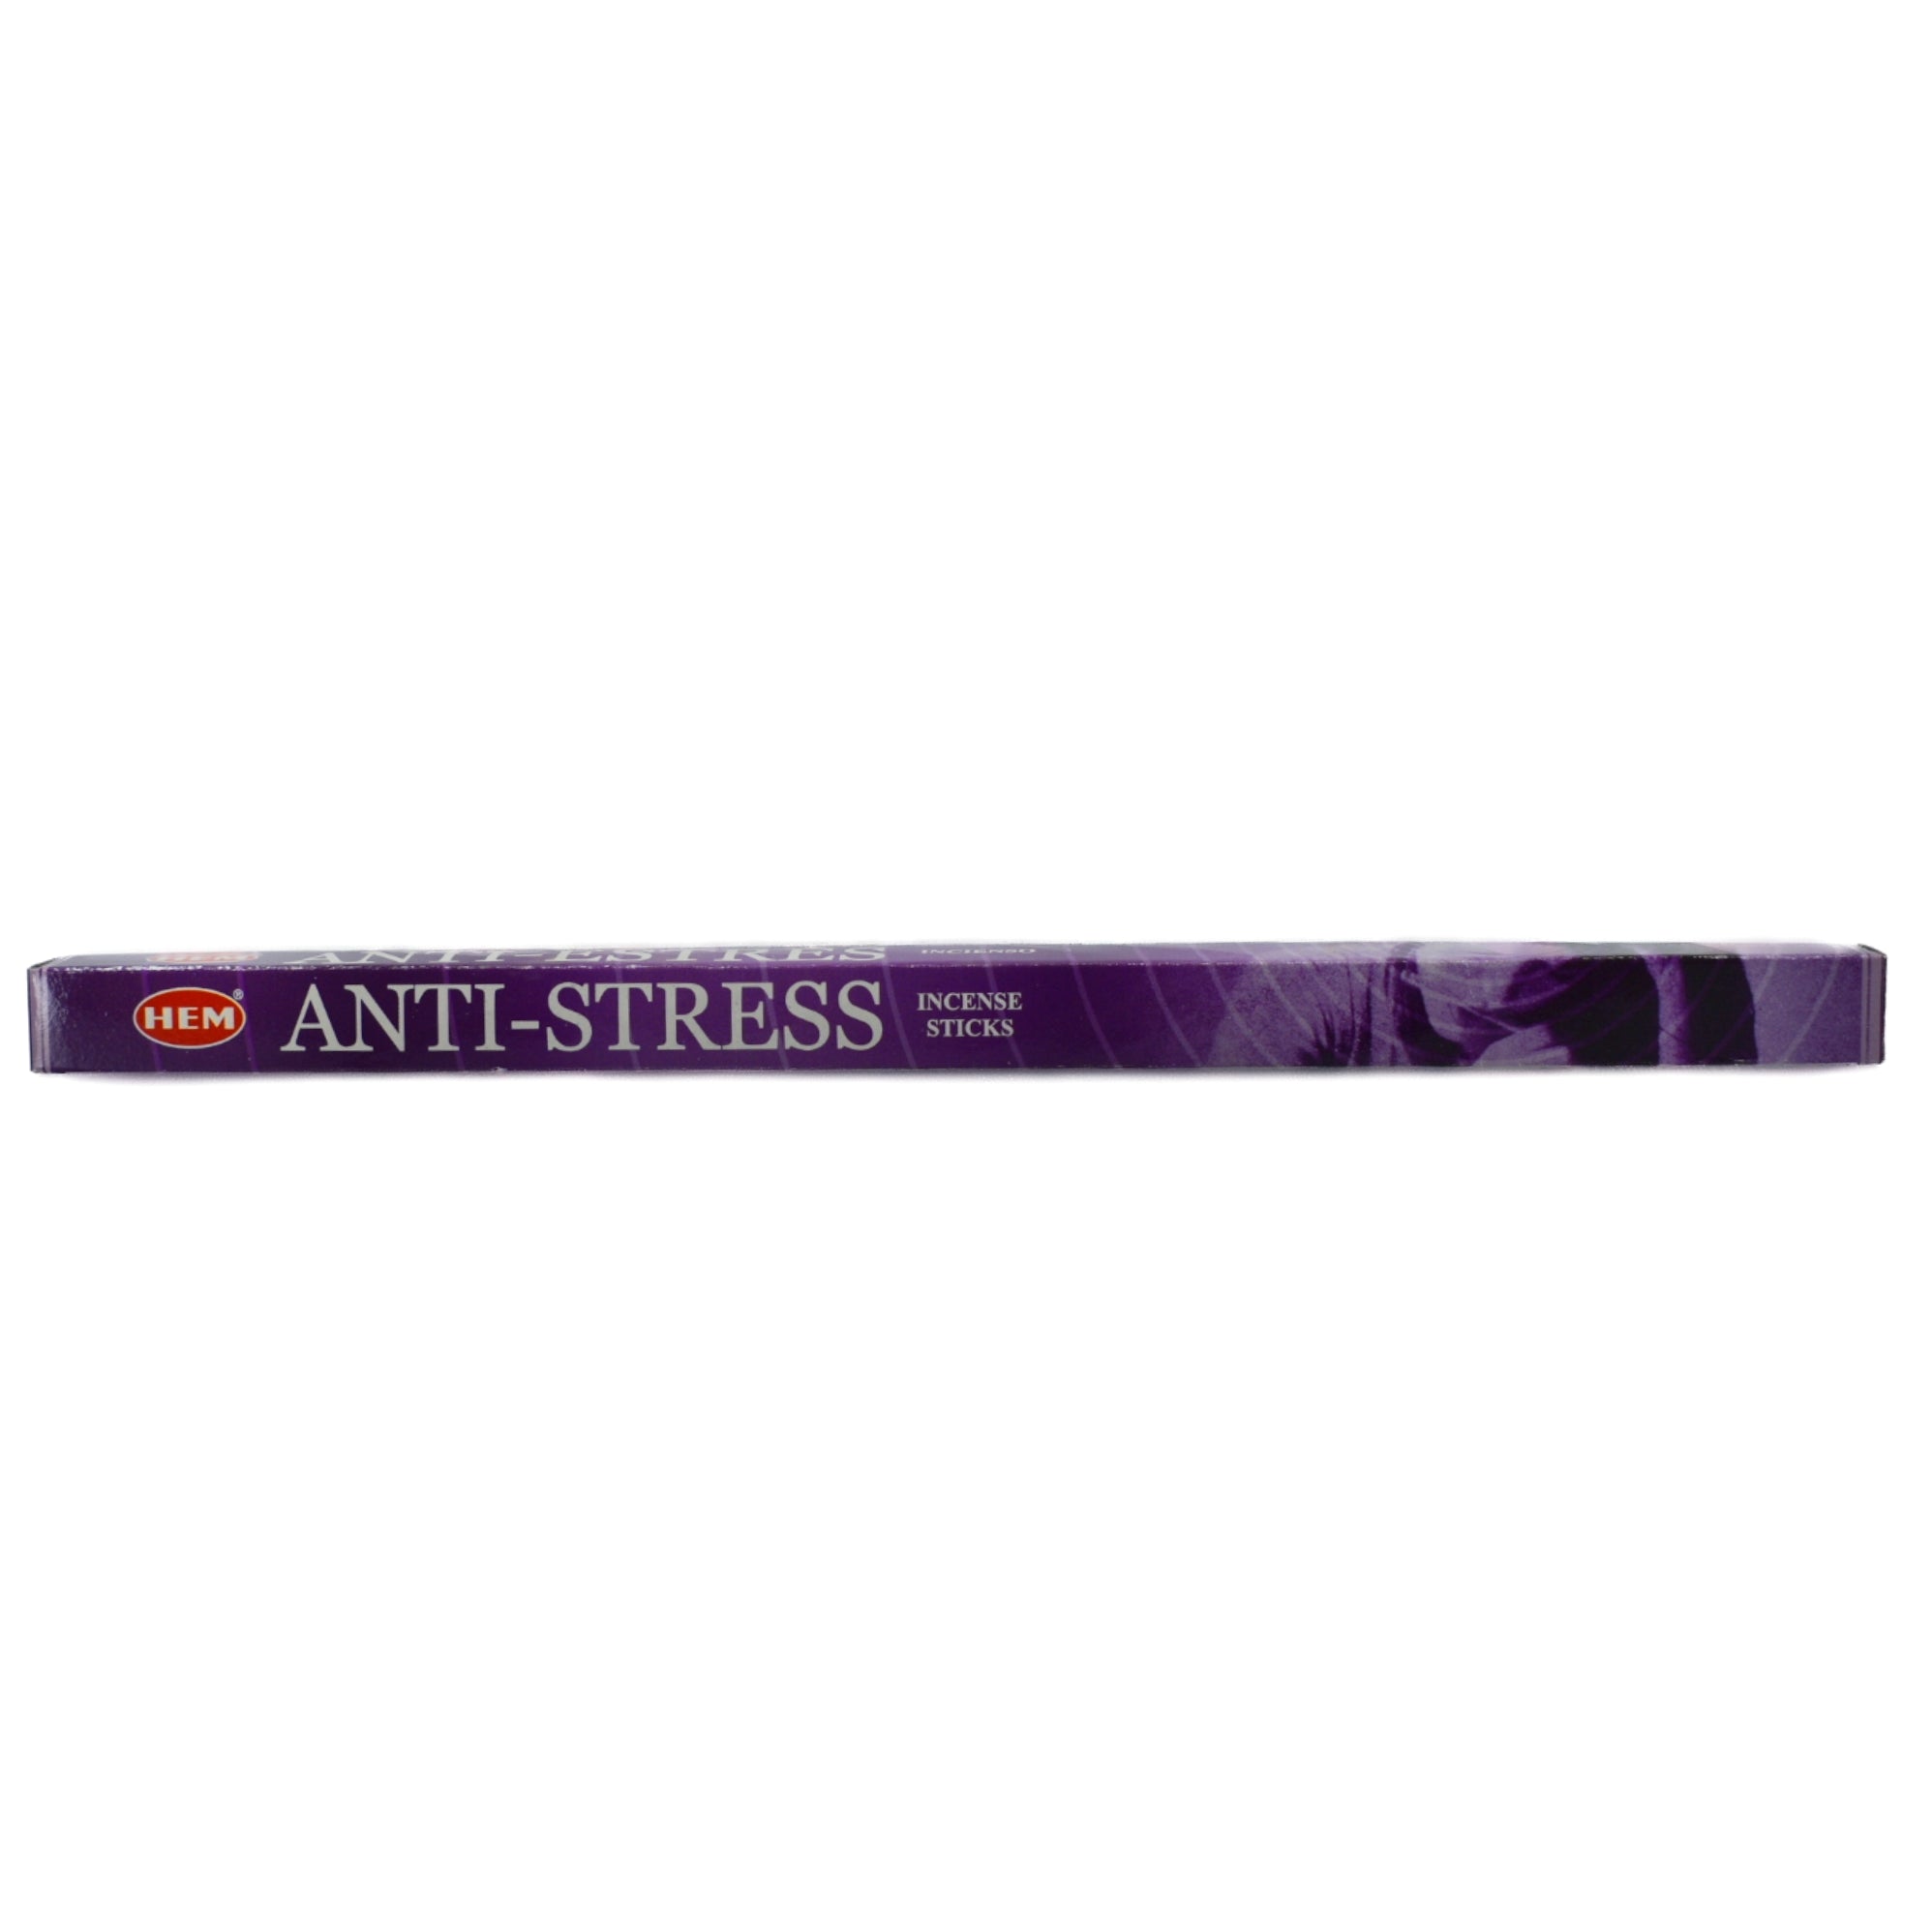 Anti Stress Incense Sticks.  The box is purple with the righthand side showing a female head and shoulders .  The left hand half has the company name Hem in a red oval.  The title  states Anti-Stress Incense sticks.  